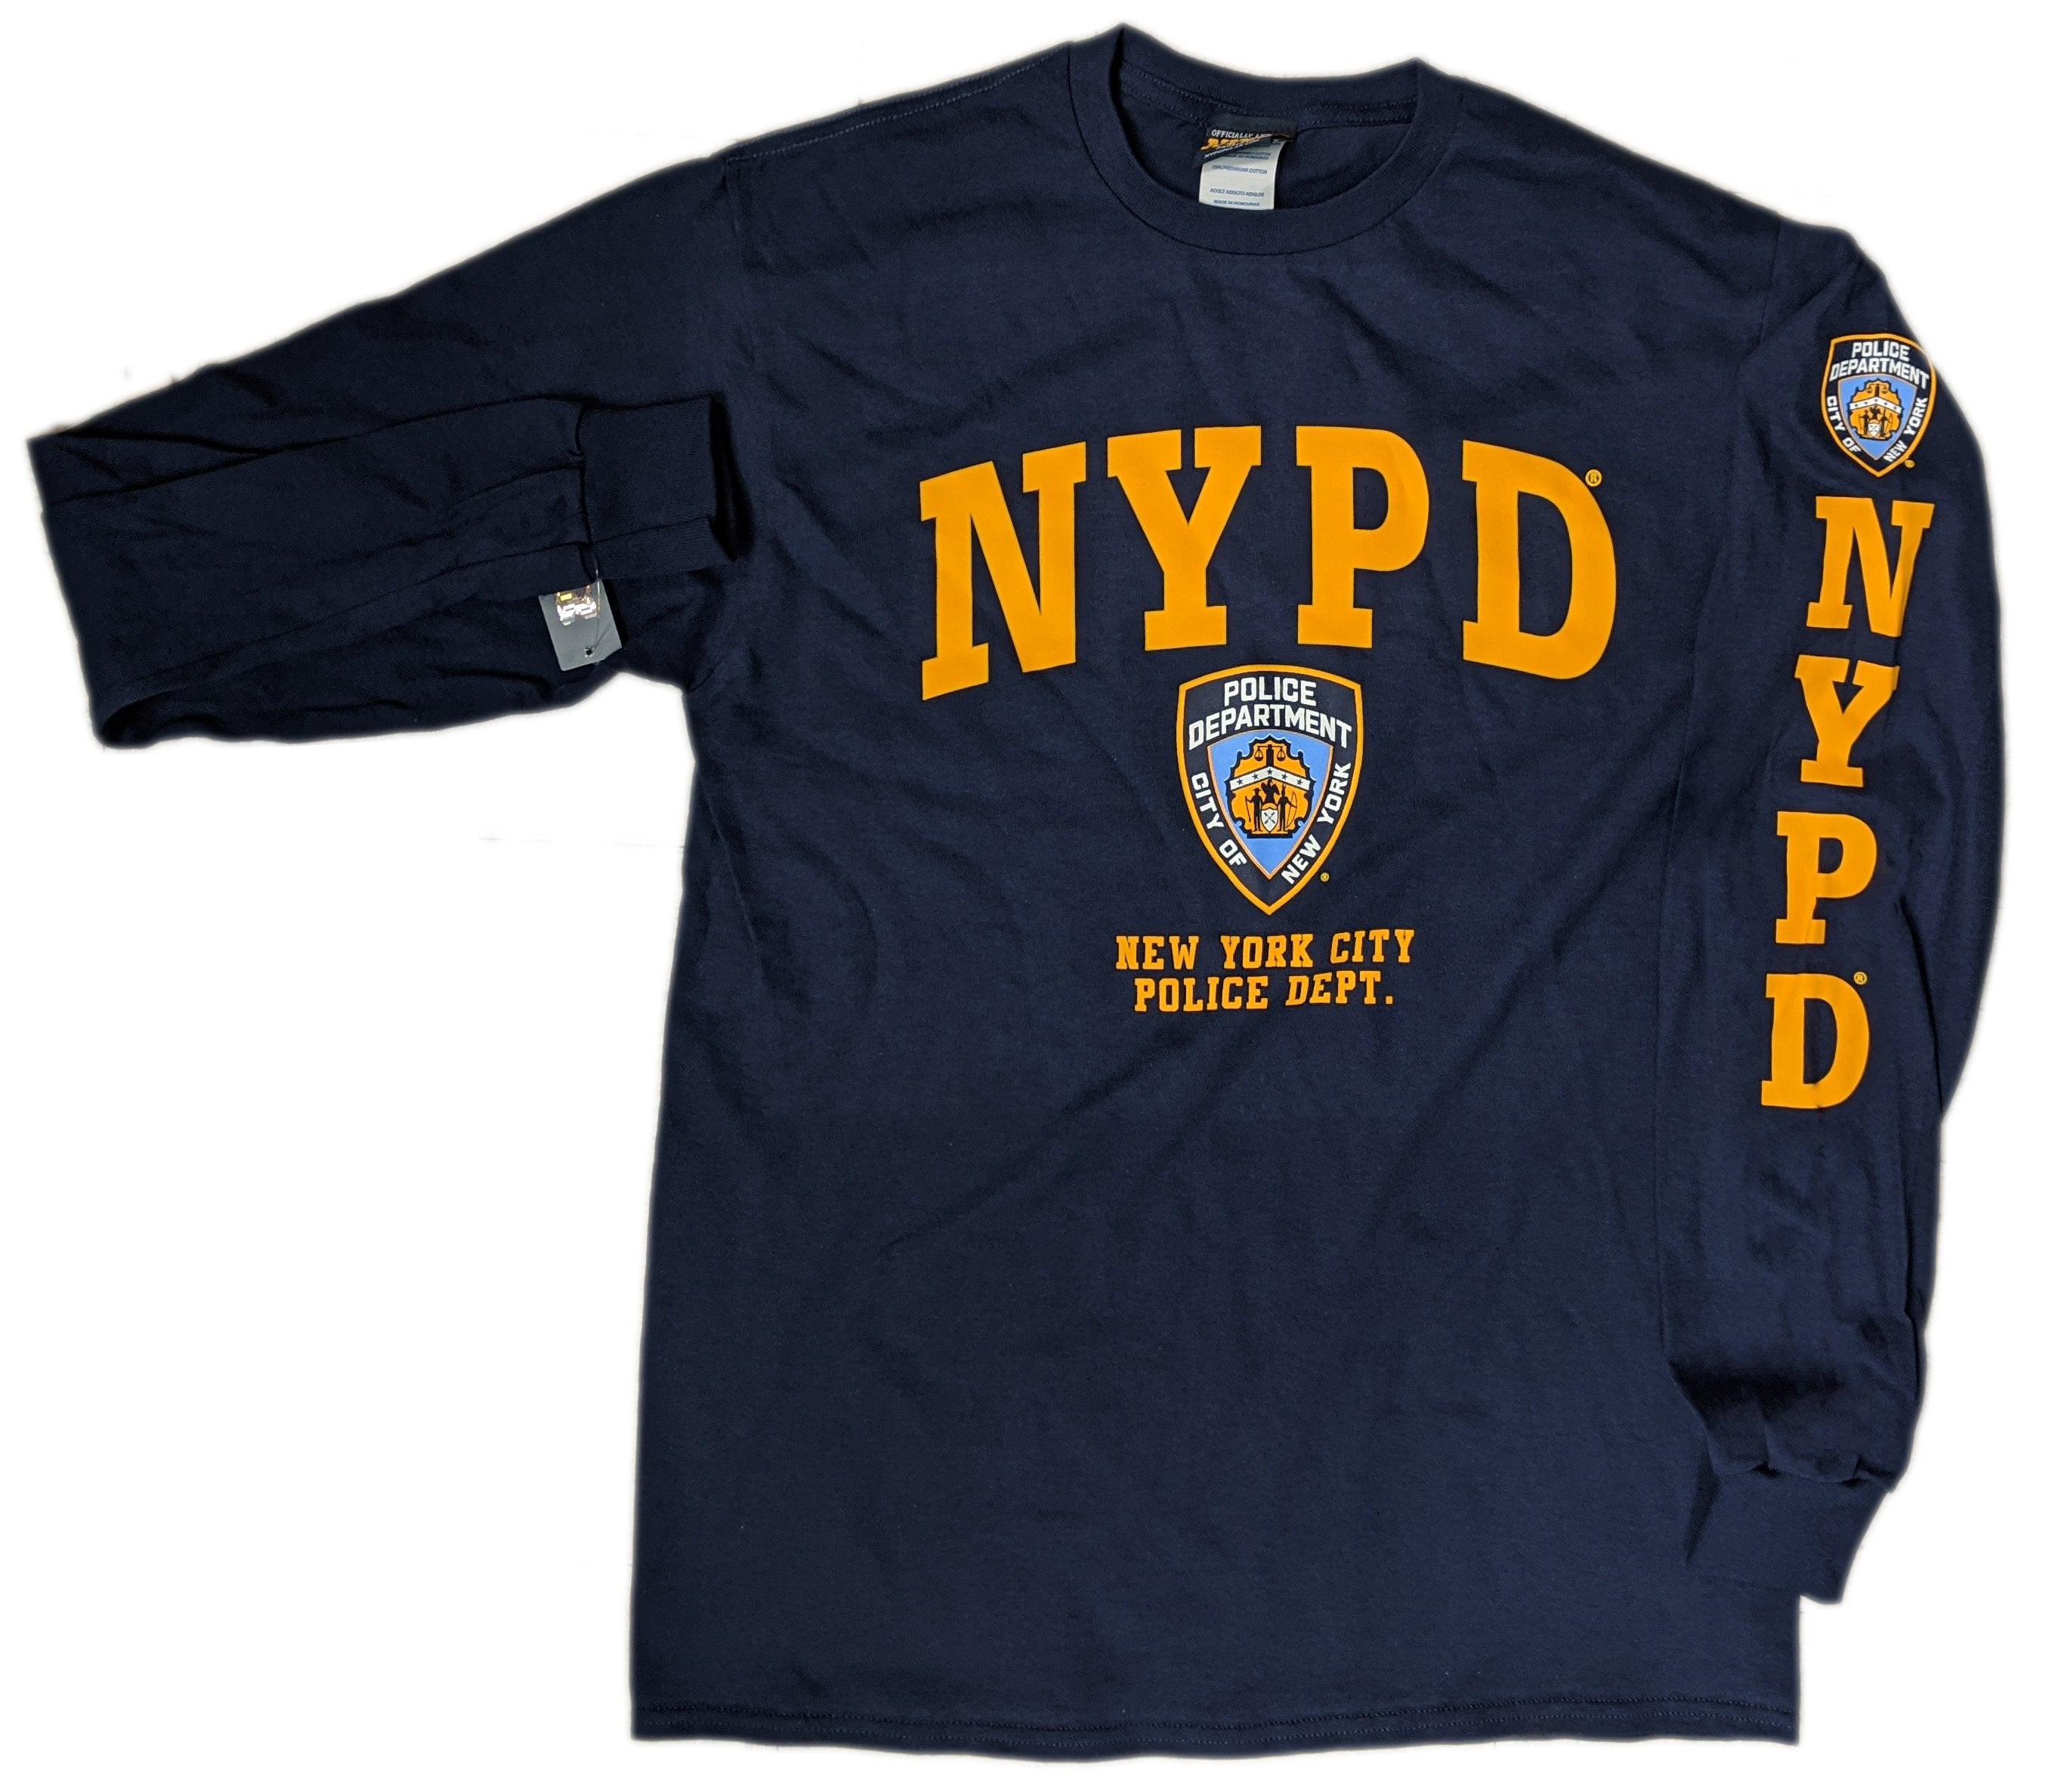 NYPD Kids Tee (Long Sleeve, Navy/Yellow, Youth Size)